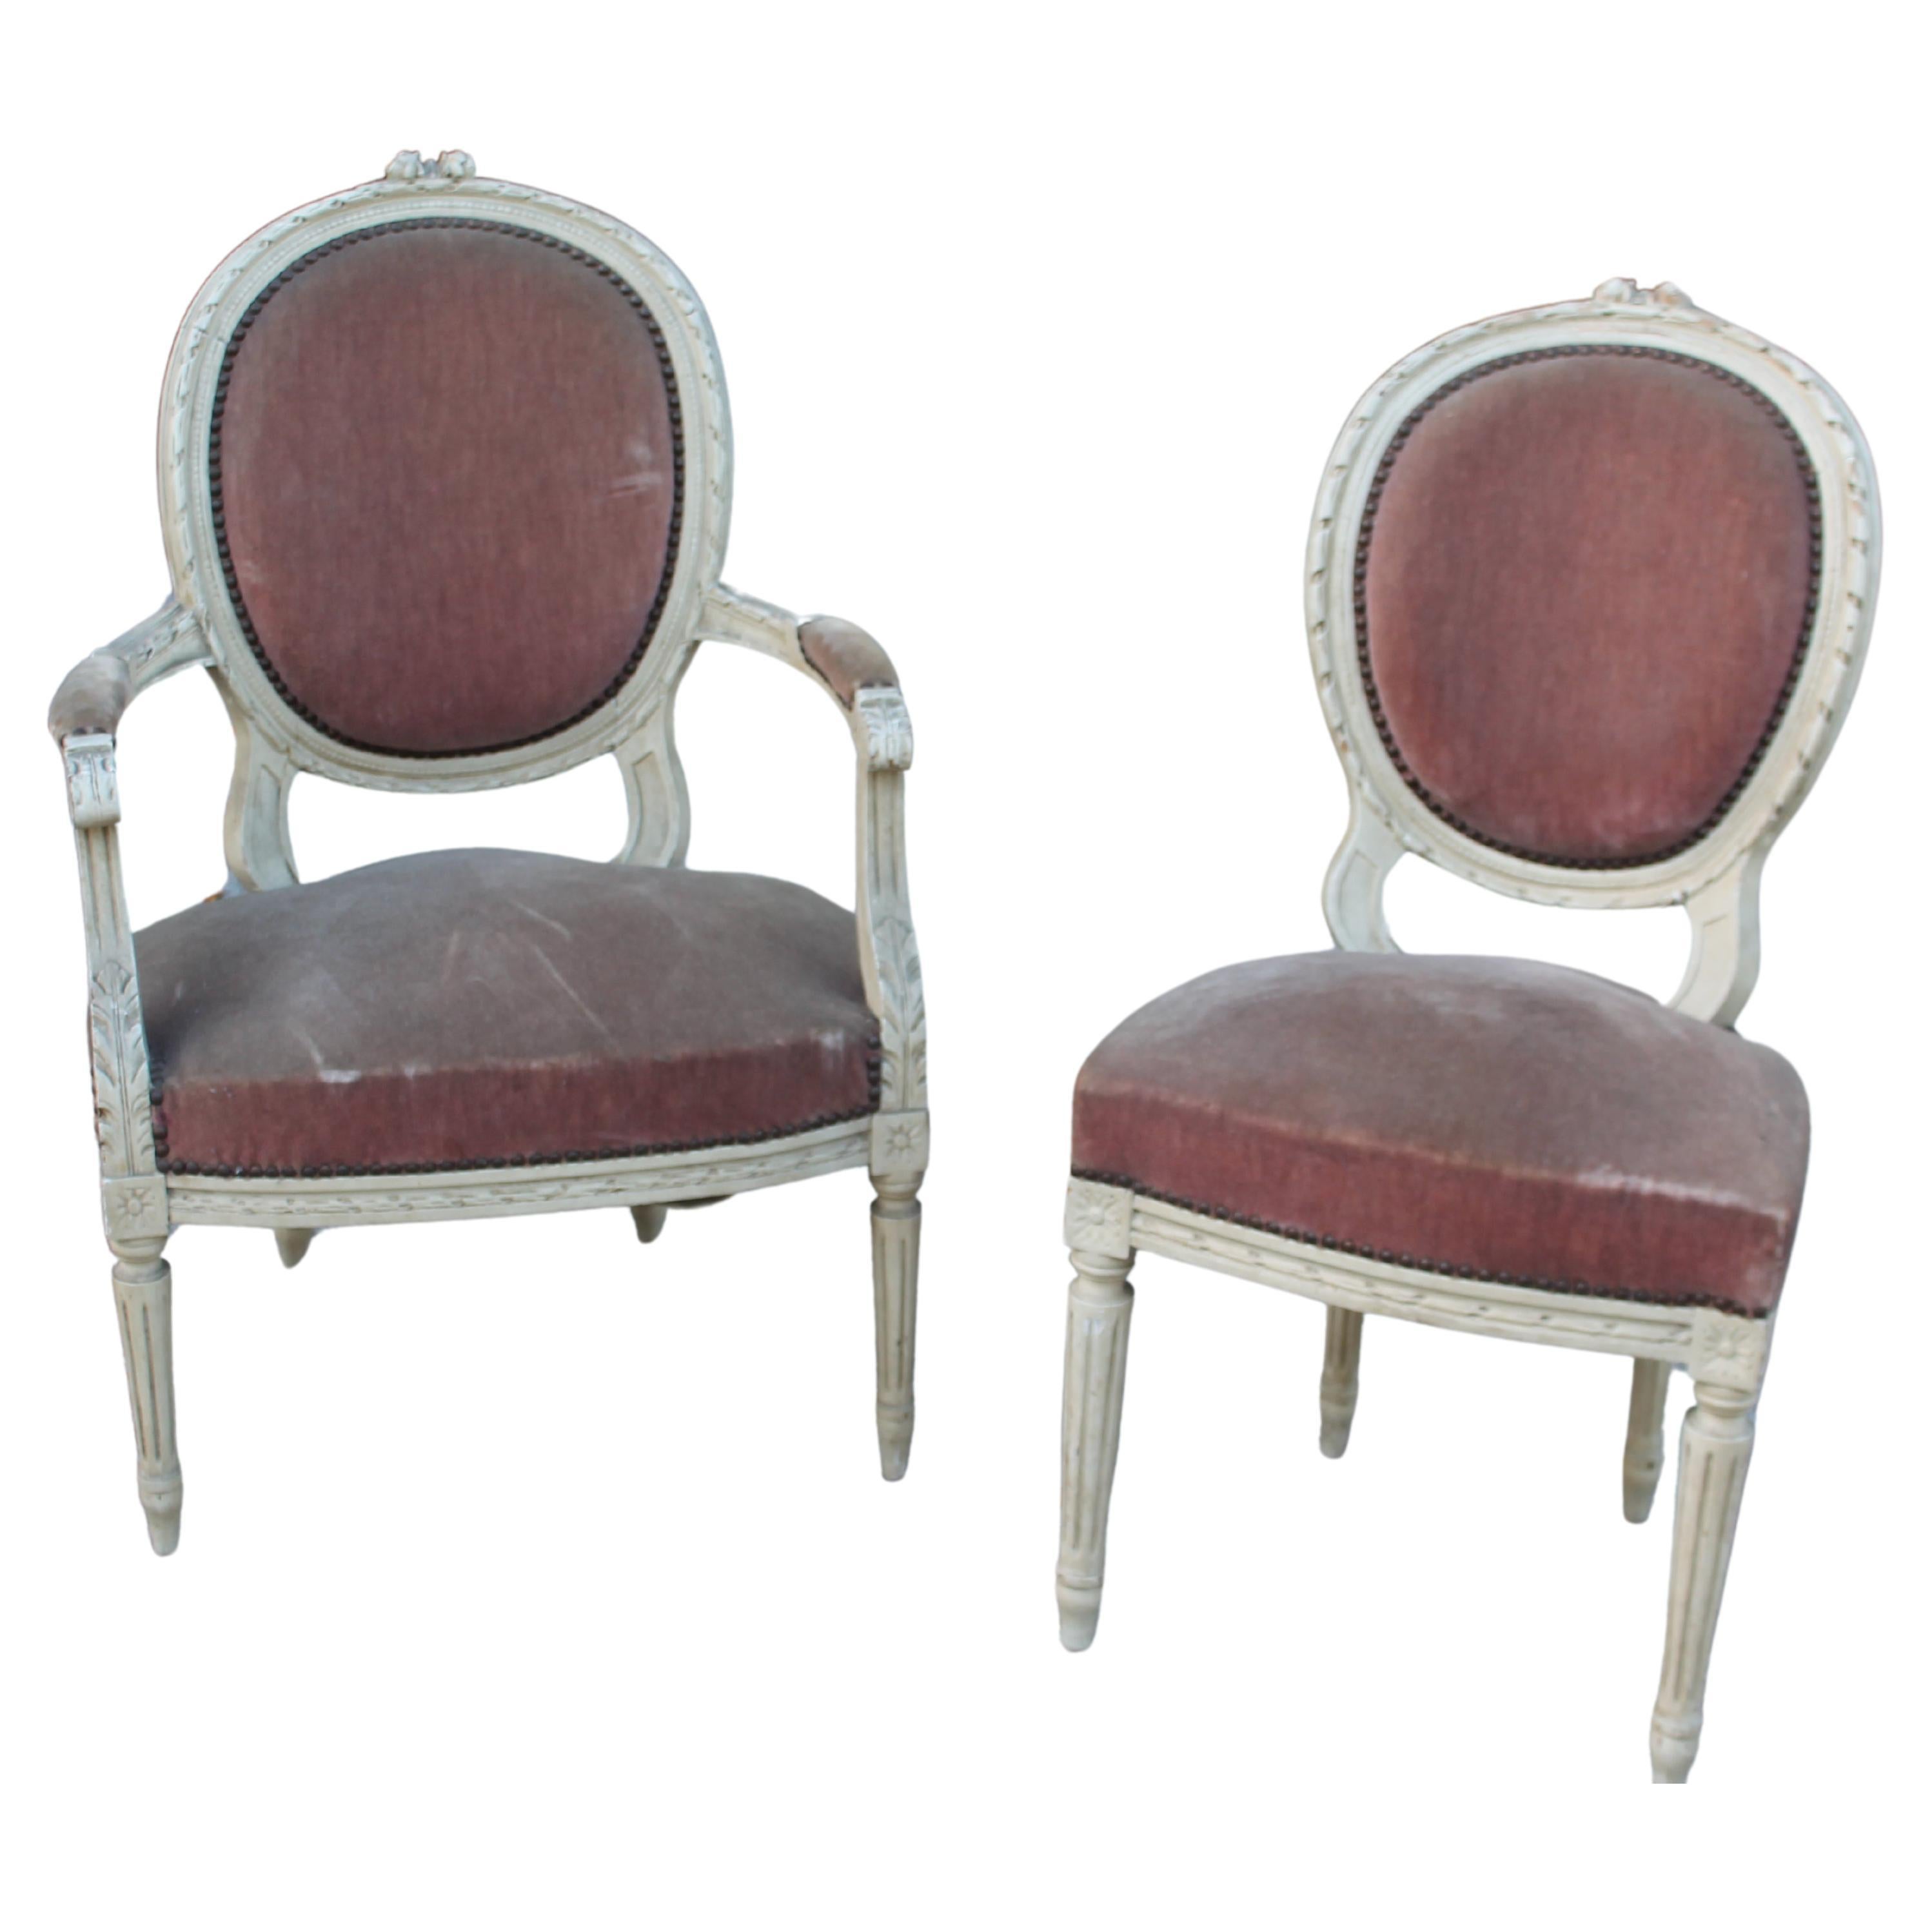  19thc French Louis XVI Arm Chair and Side Chair [2 piece] For Sale